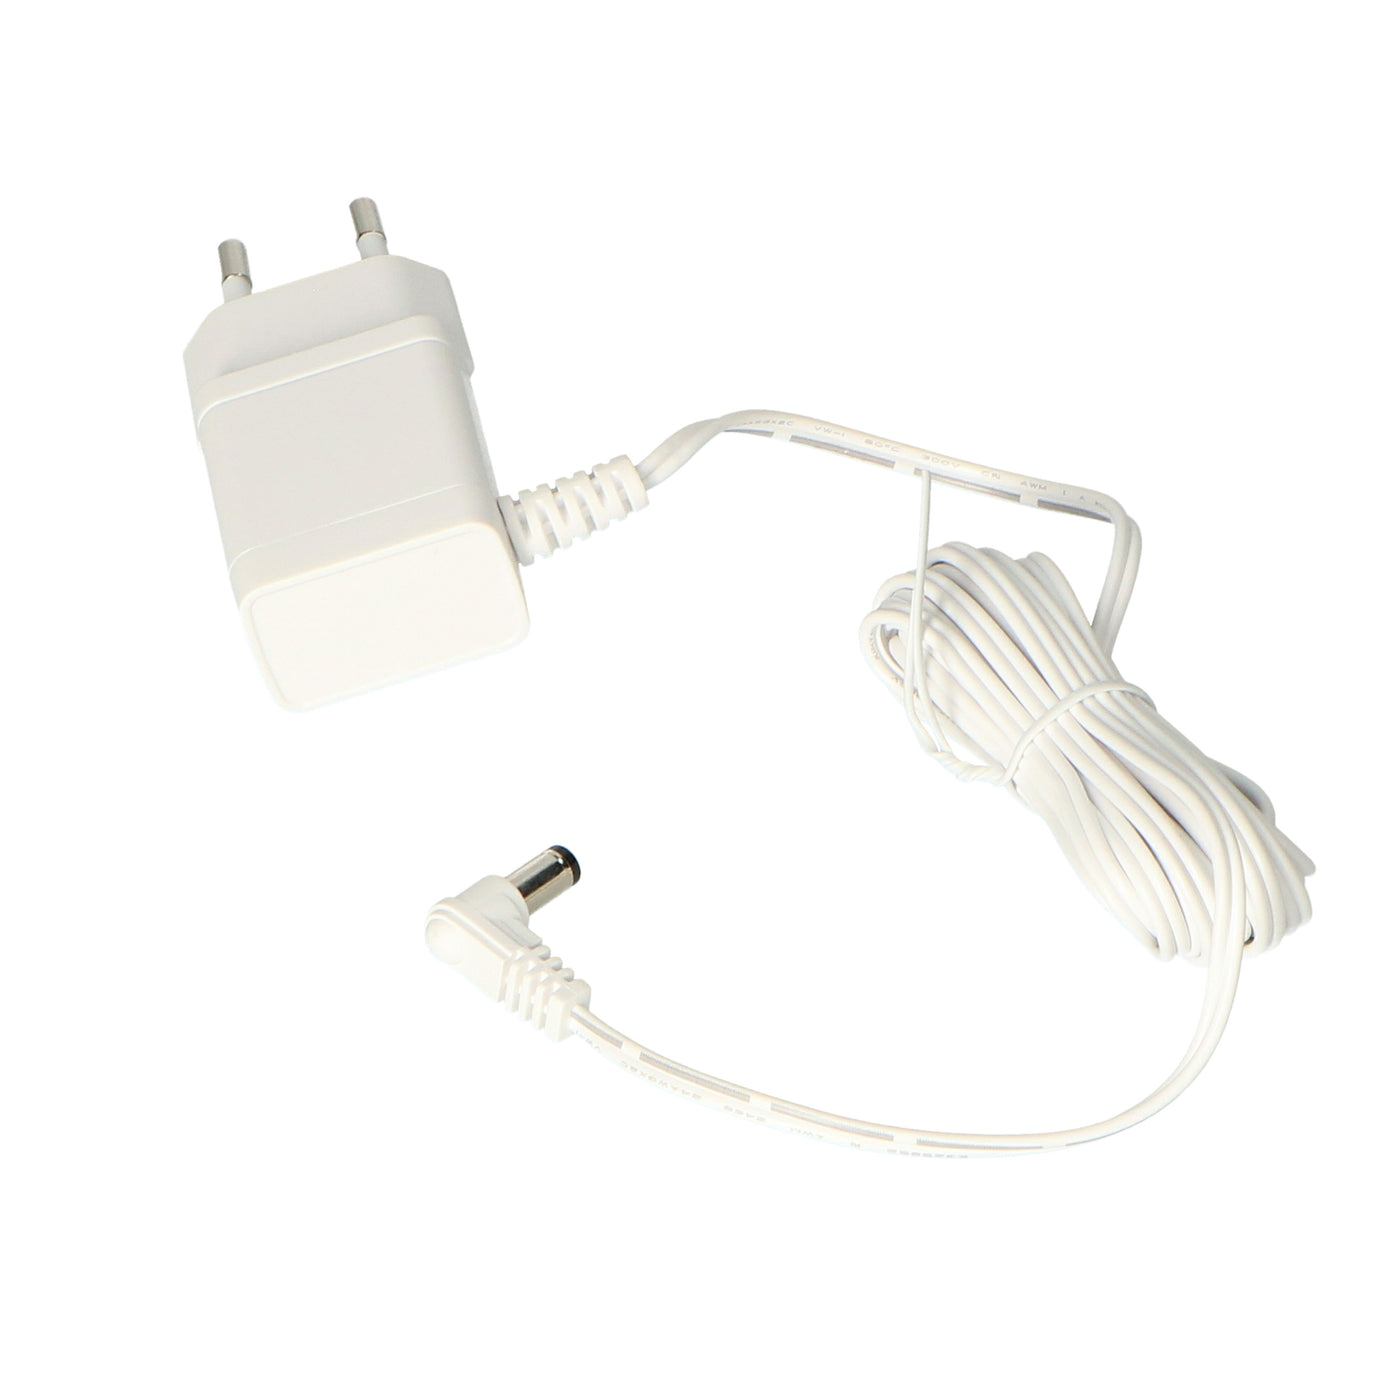 P002046 - Adapter baby unit DBX-88 ECO